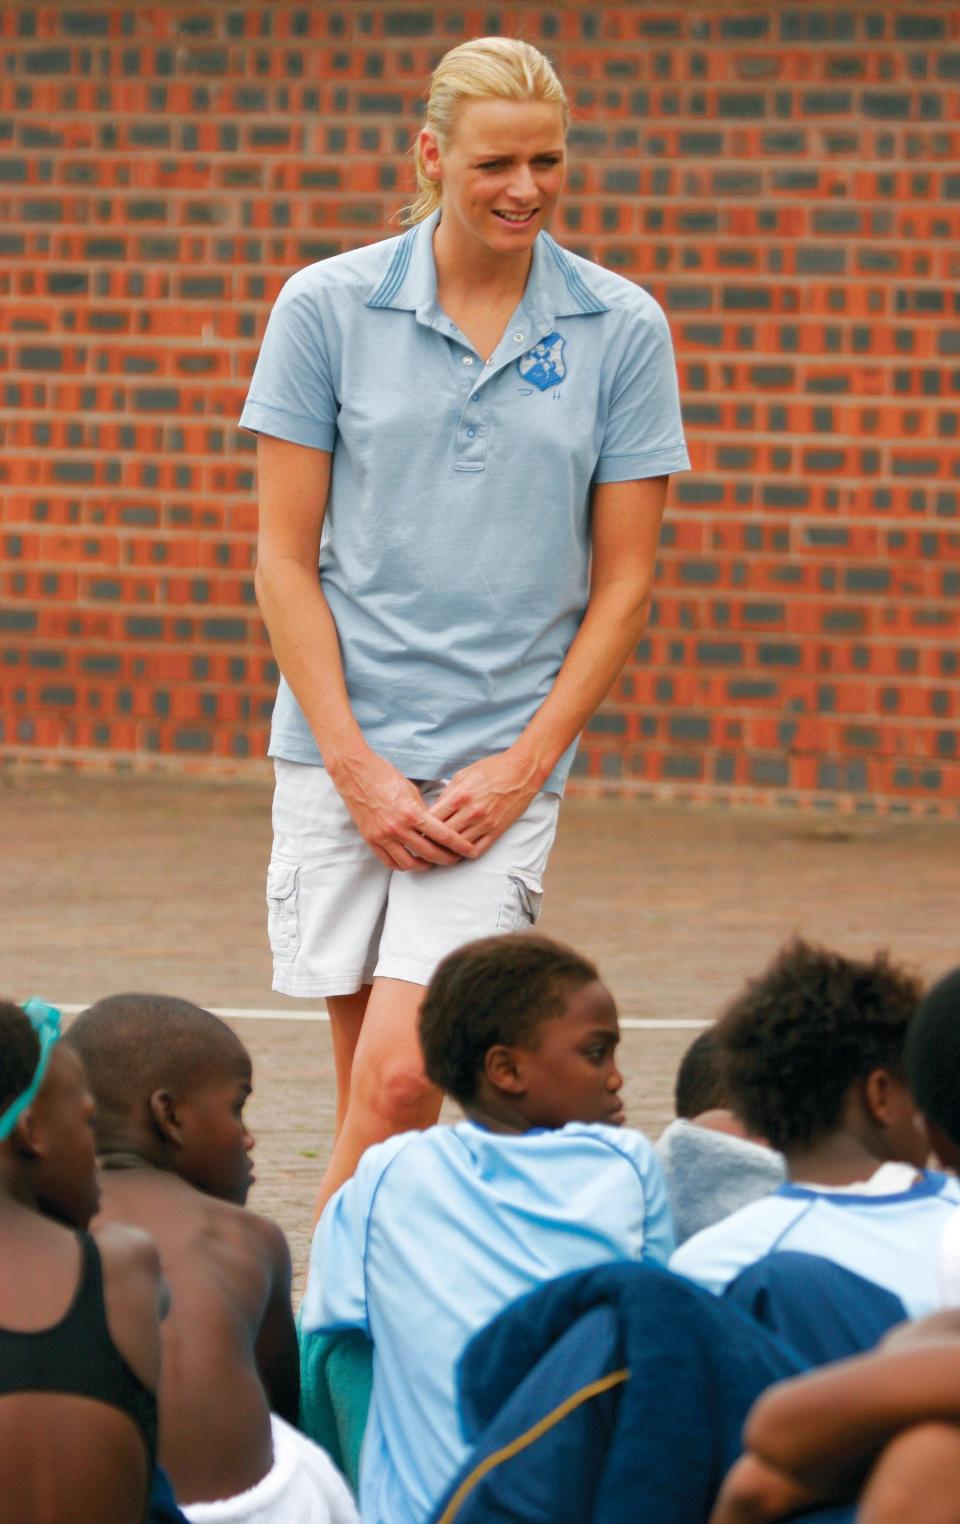 Charlene Wittstock coaching children at a training session in Richards Bay, South Africa.